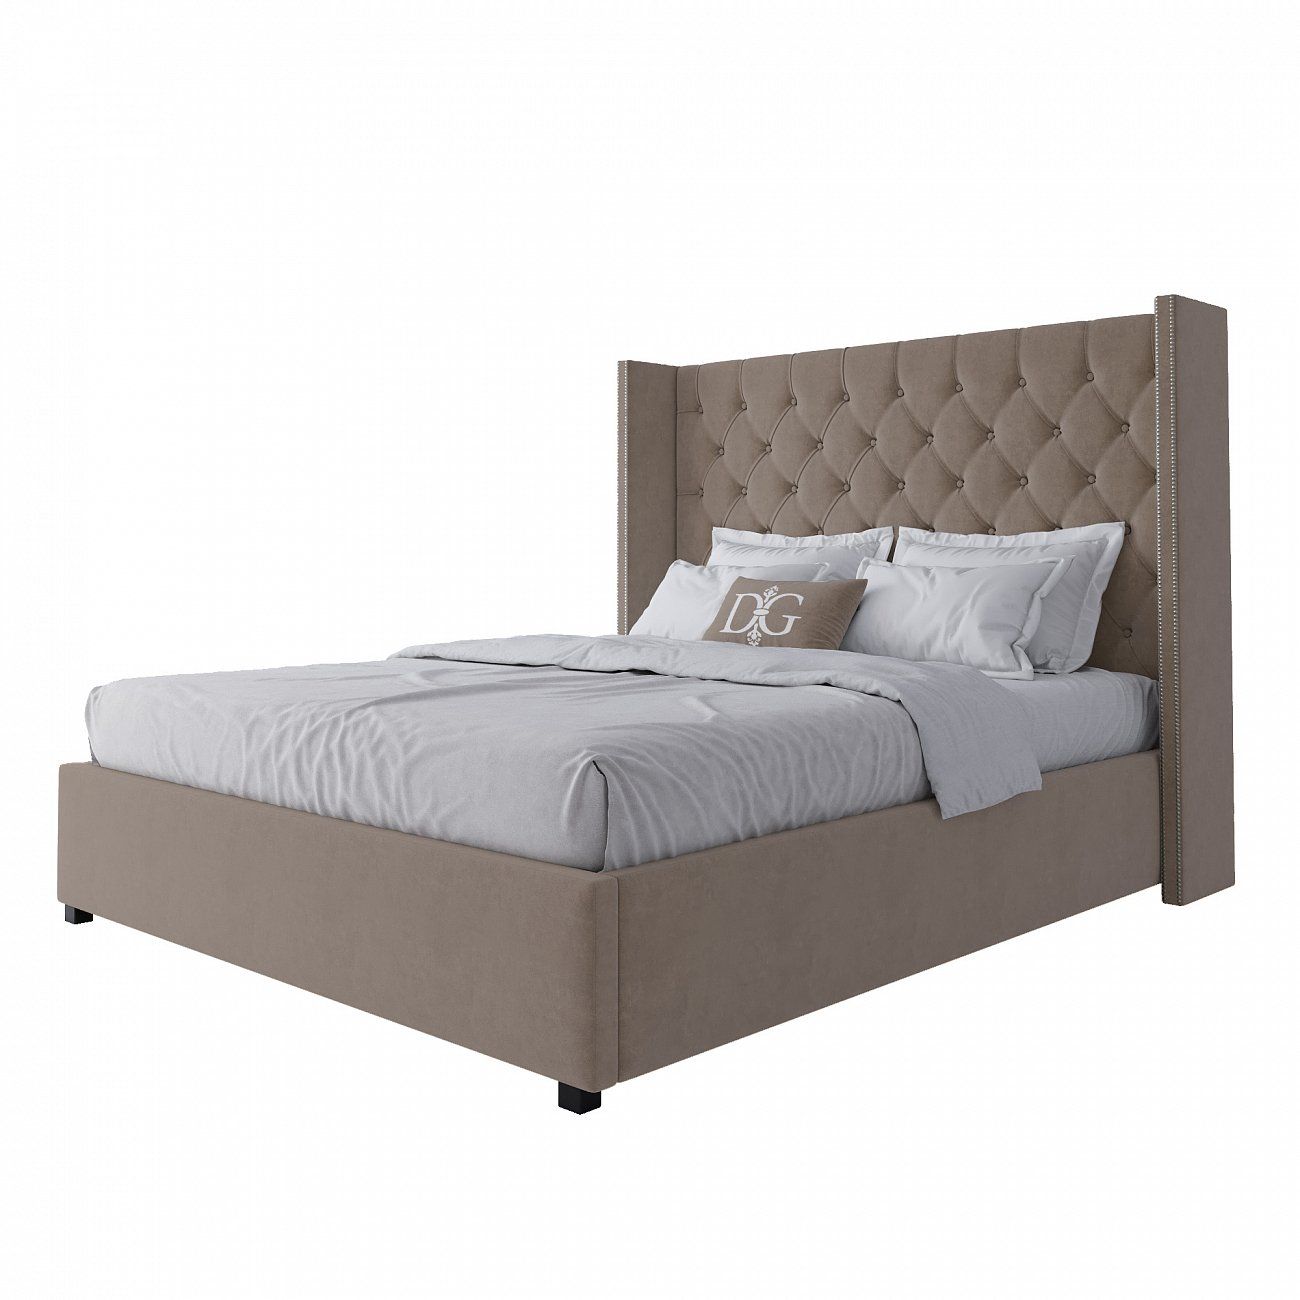 Double bed with upholstered headboard 160x200 cm beige Wing